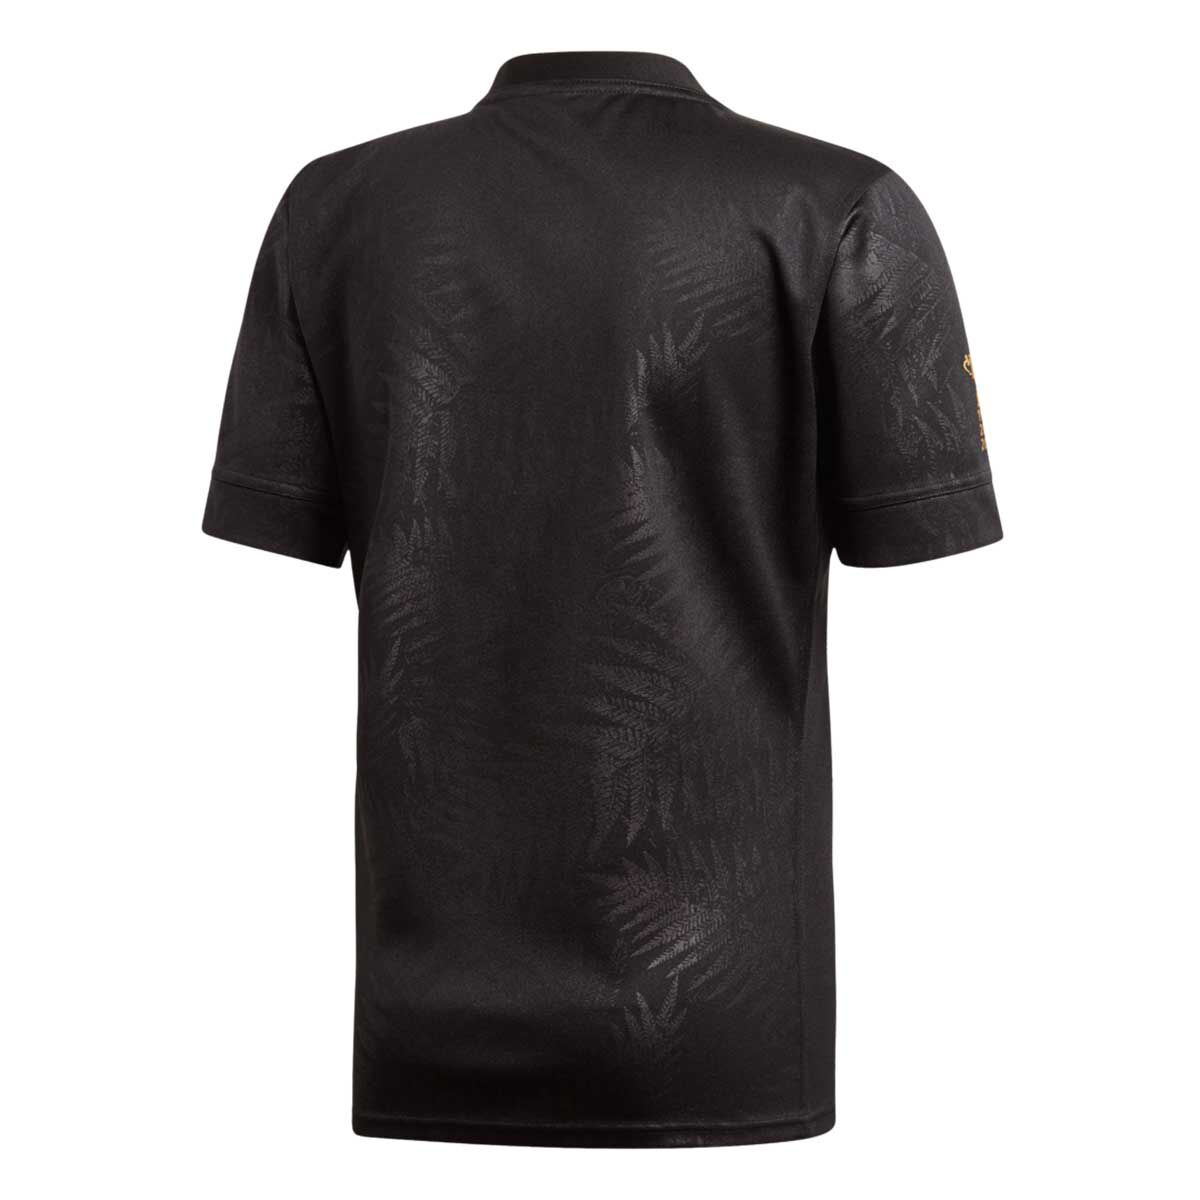 jersey rugby all black